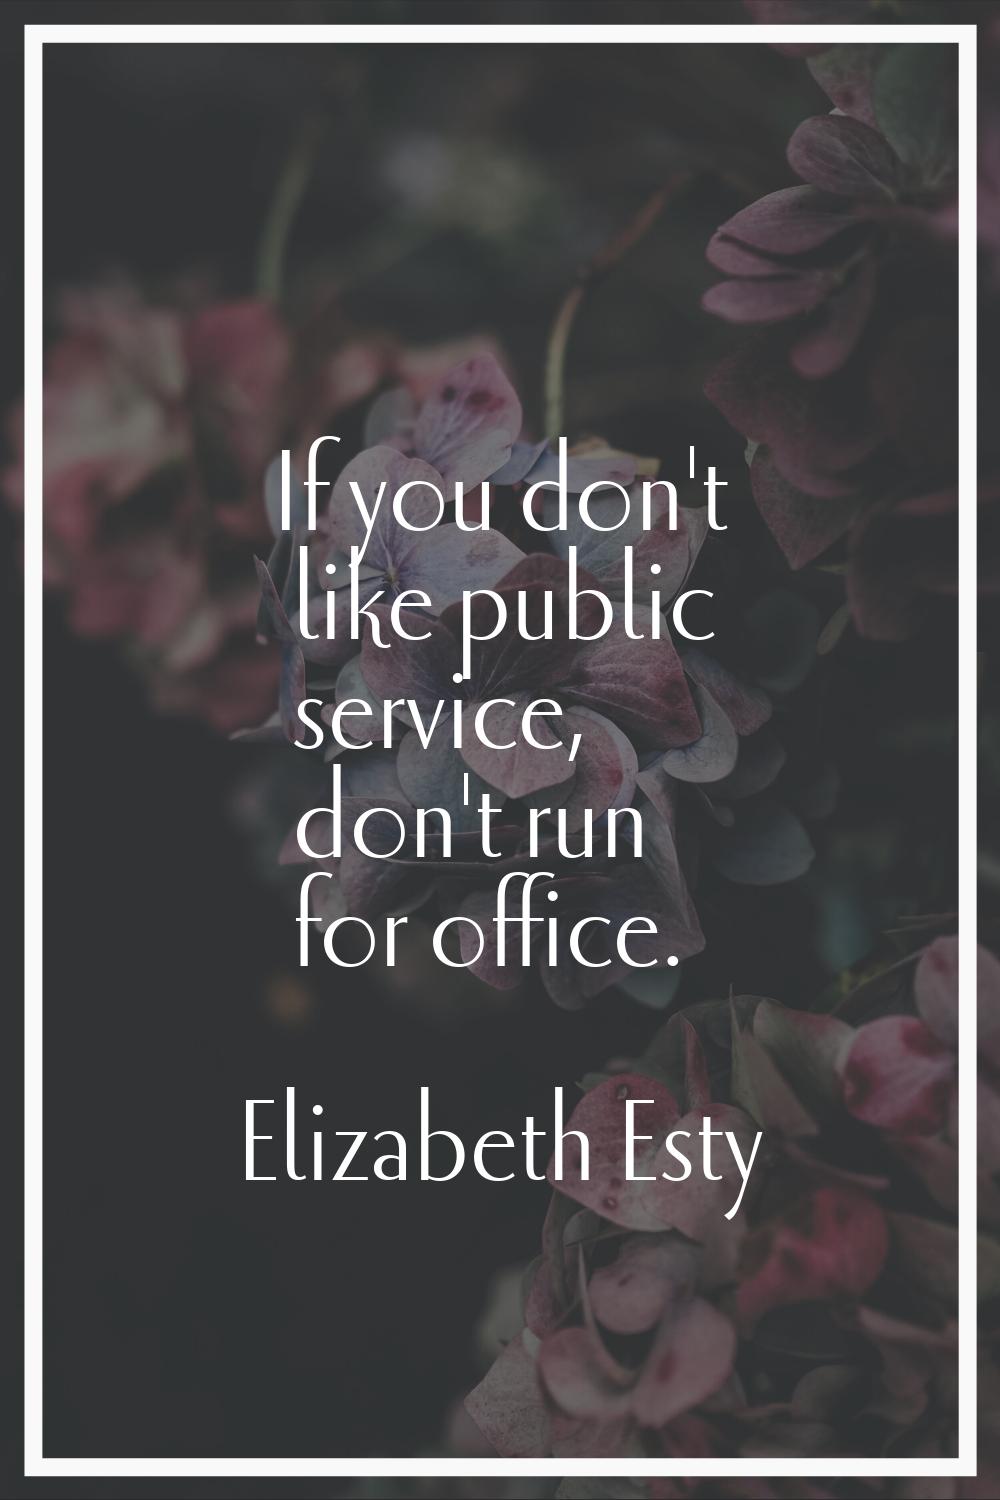 If you don't like public service, don't run for office.